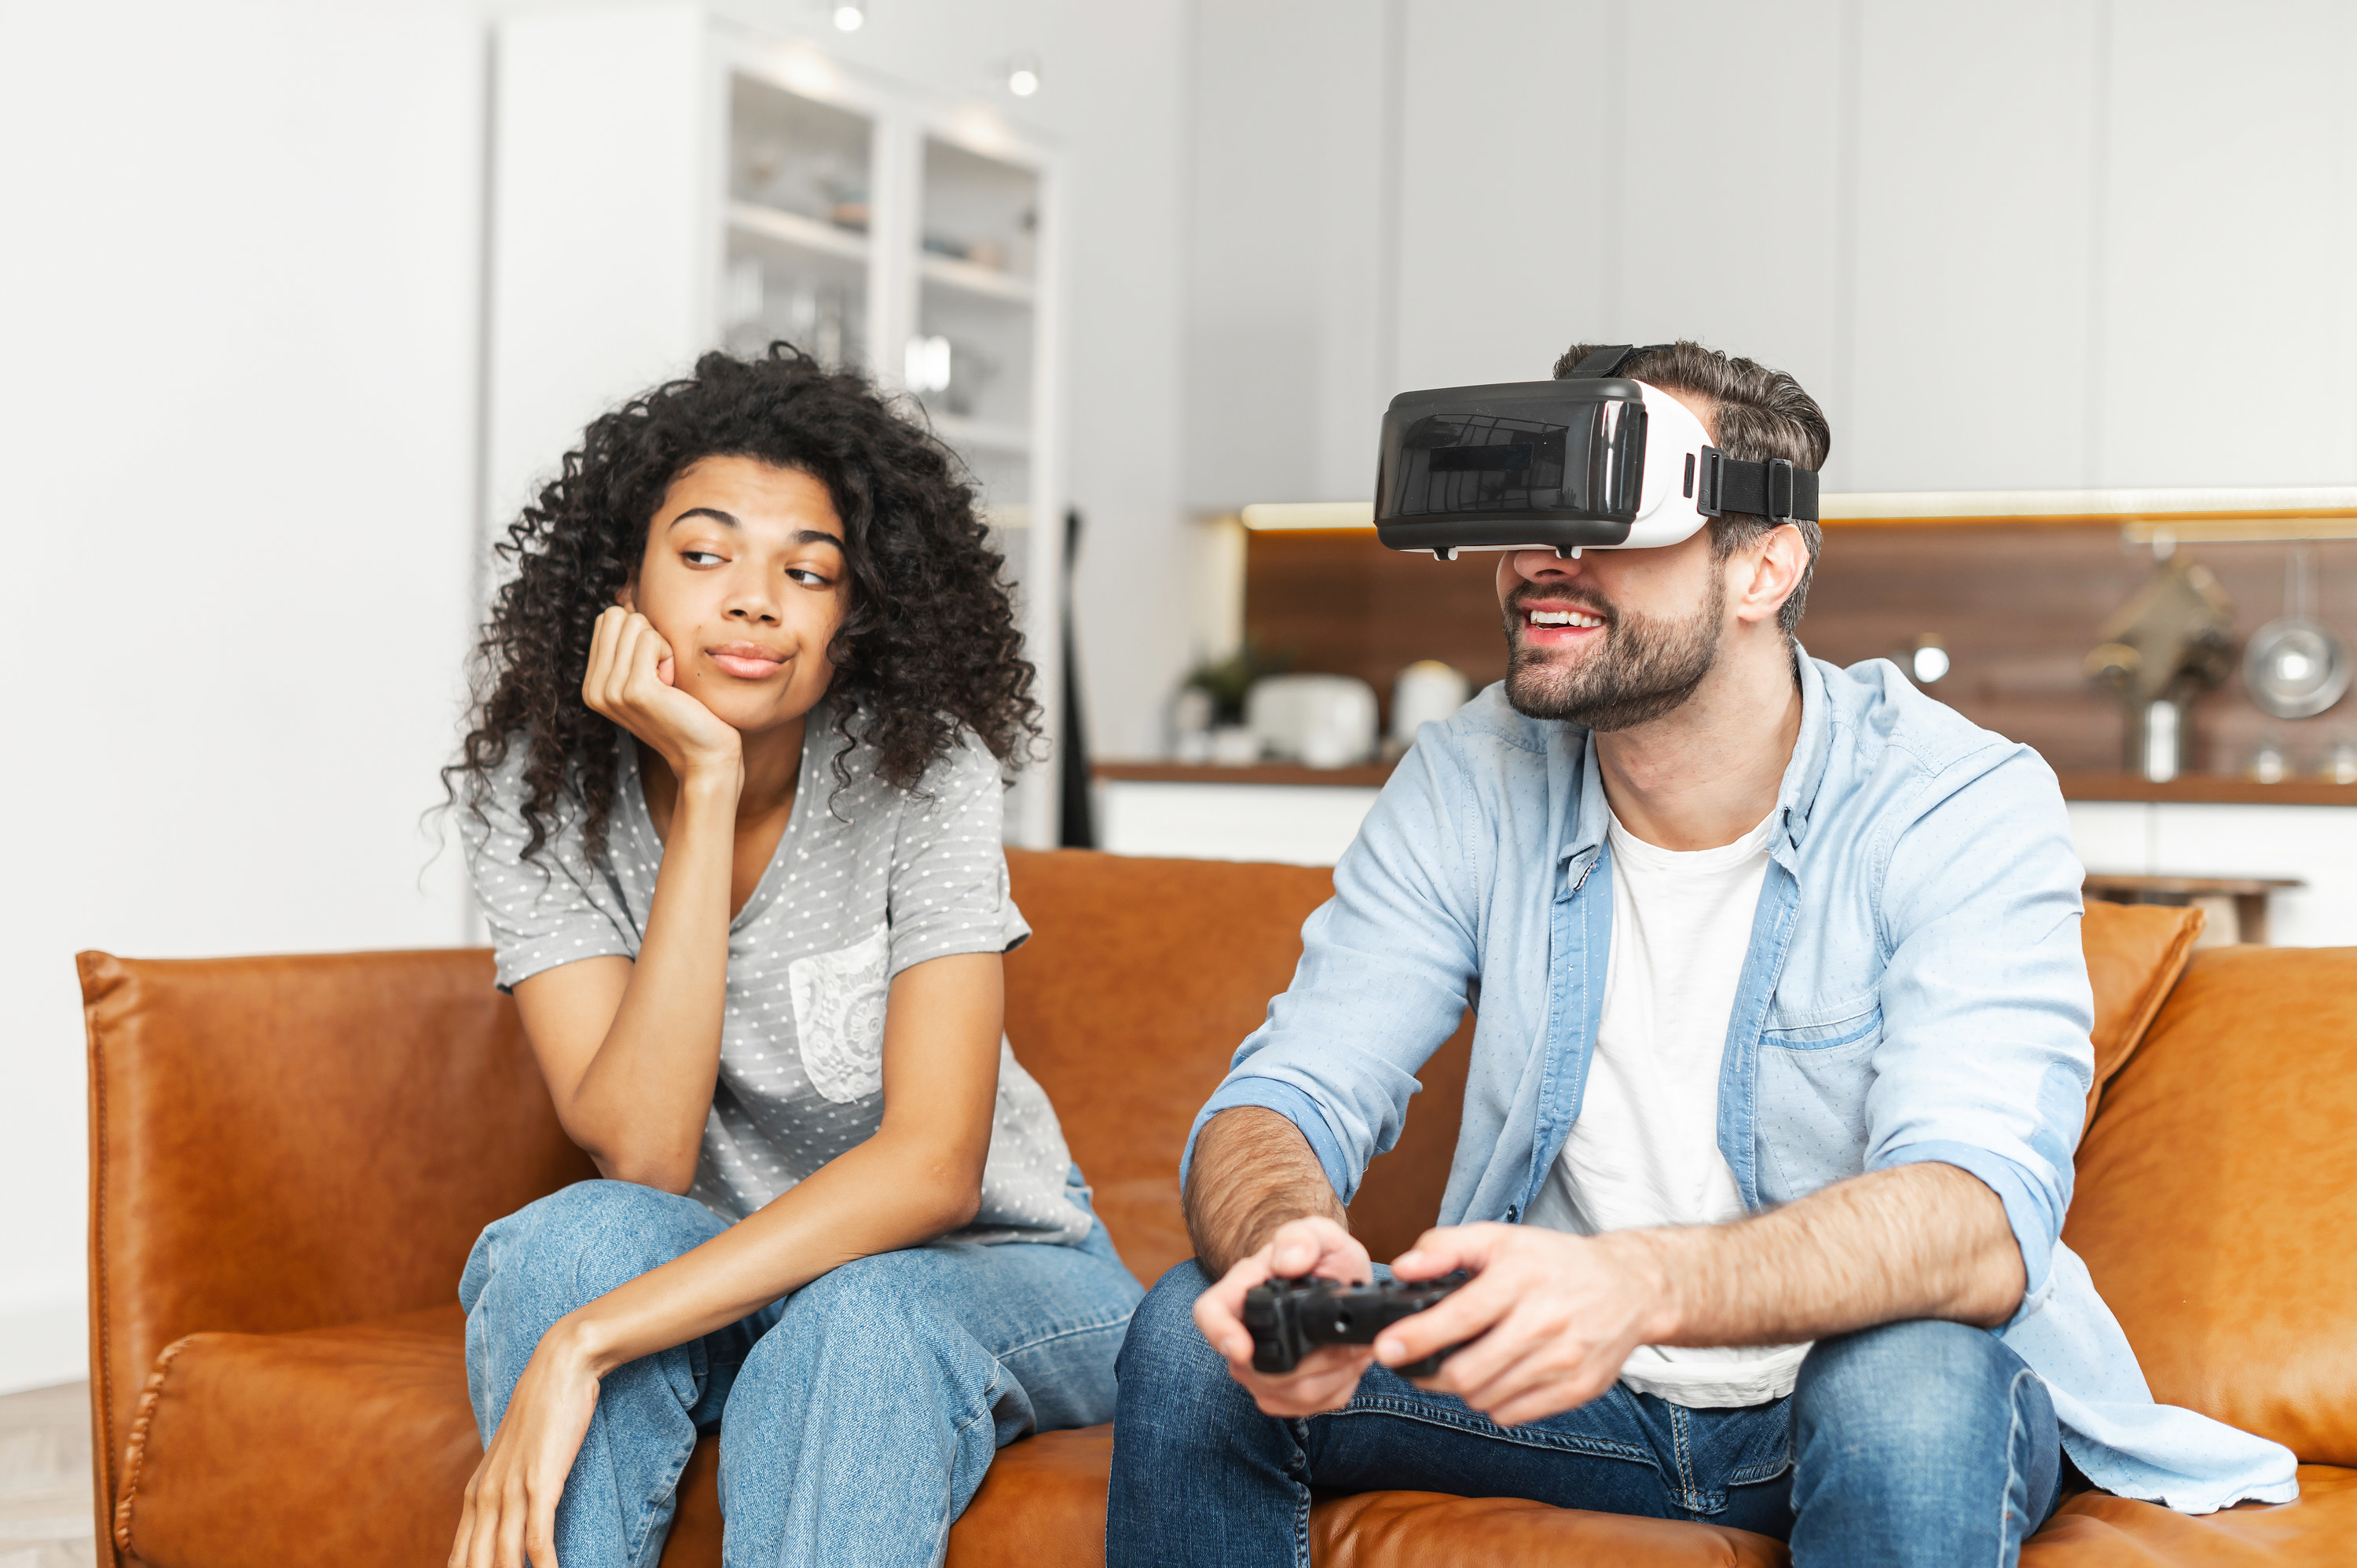 woman looking bored while her husband sits next to her playing video games